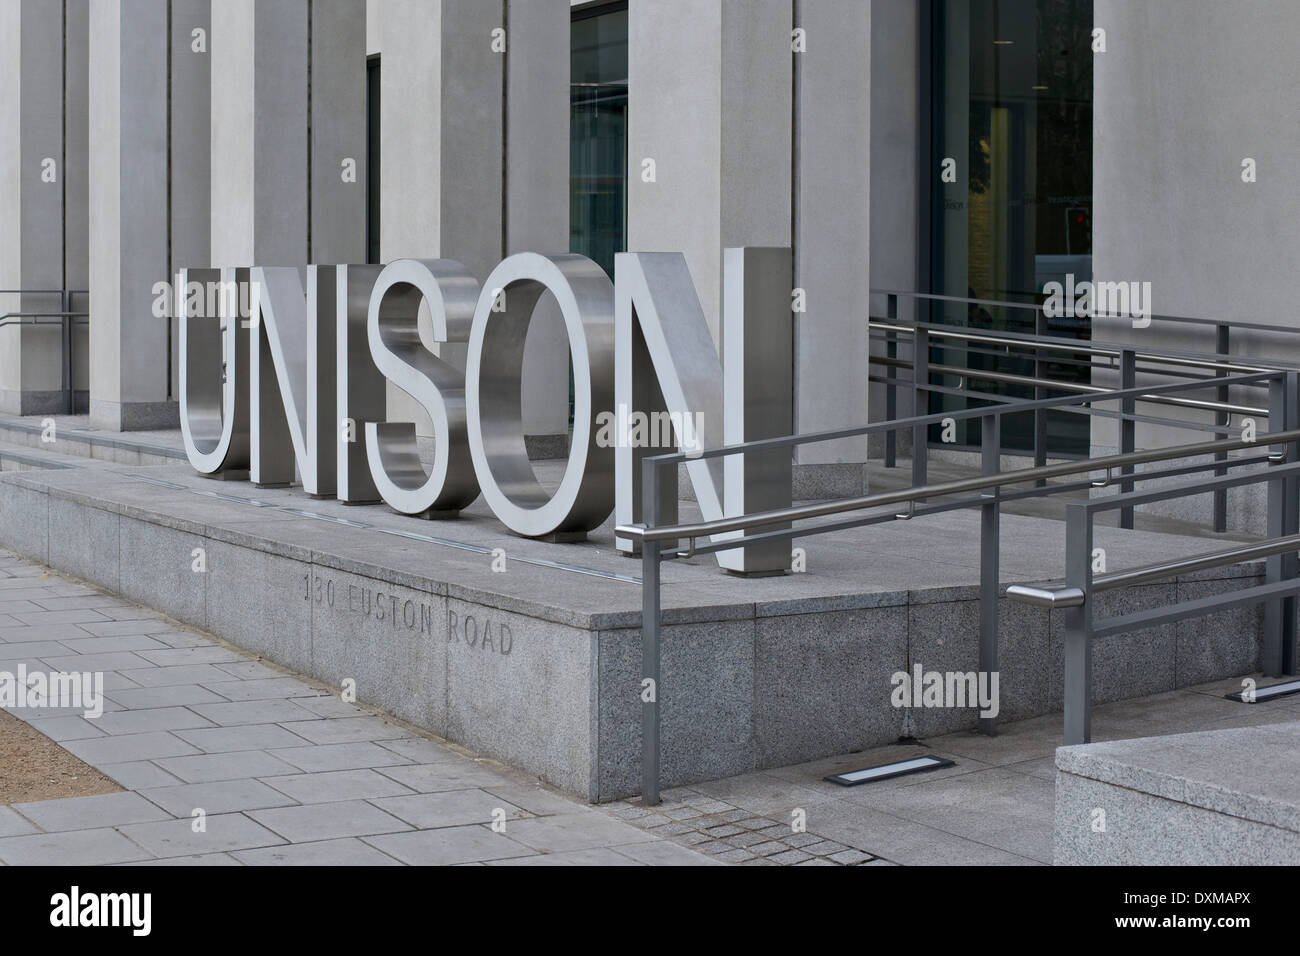 Outside the Head Office of the UK public sector union Unison, a metal sign spells the union's name. 130 Euston Road Rd, London Stock Photo